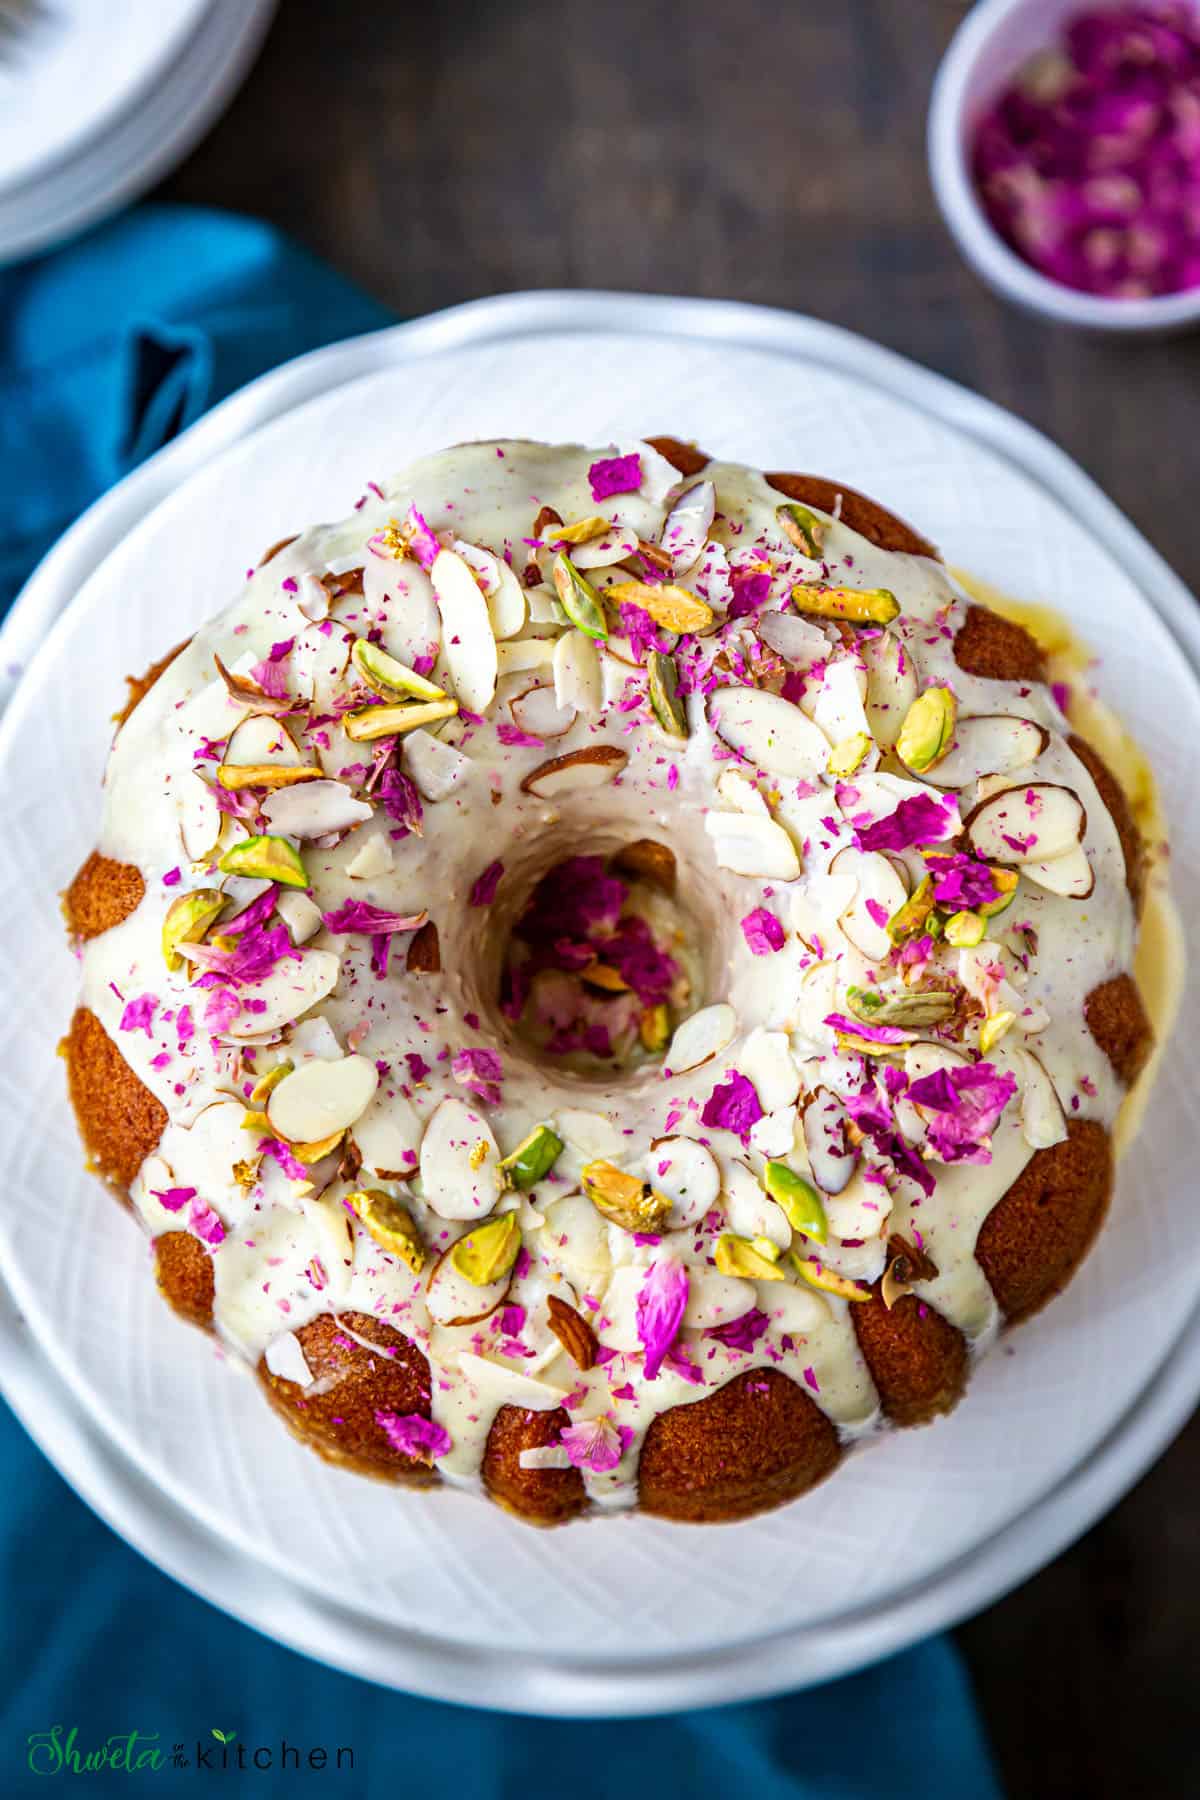 top view of the decorated thandai bundt cake on a plate